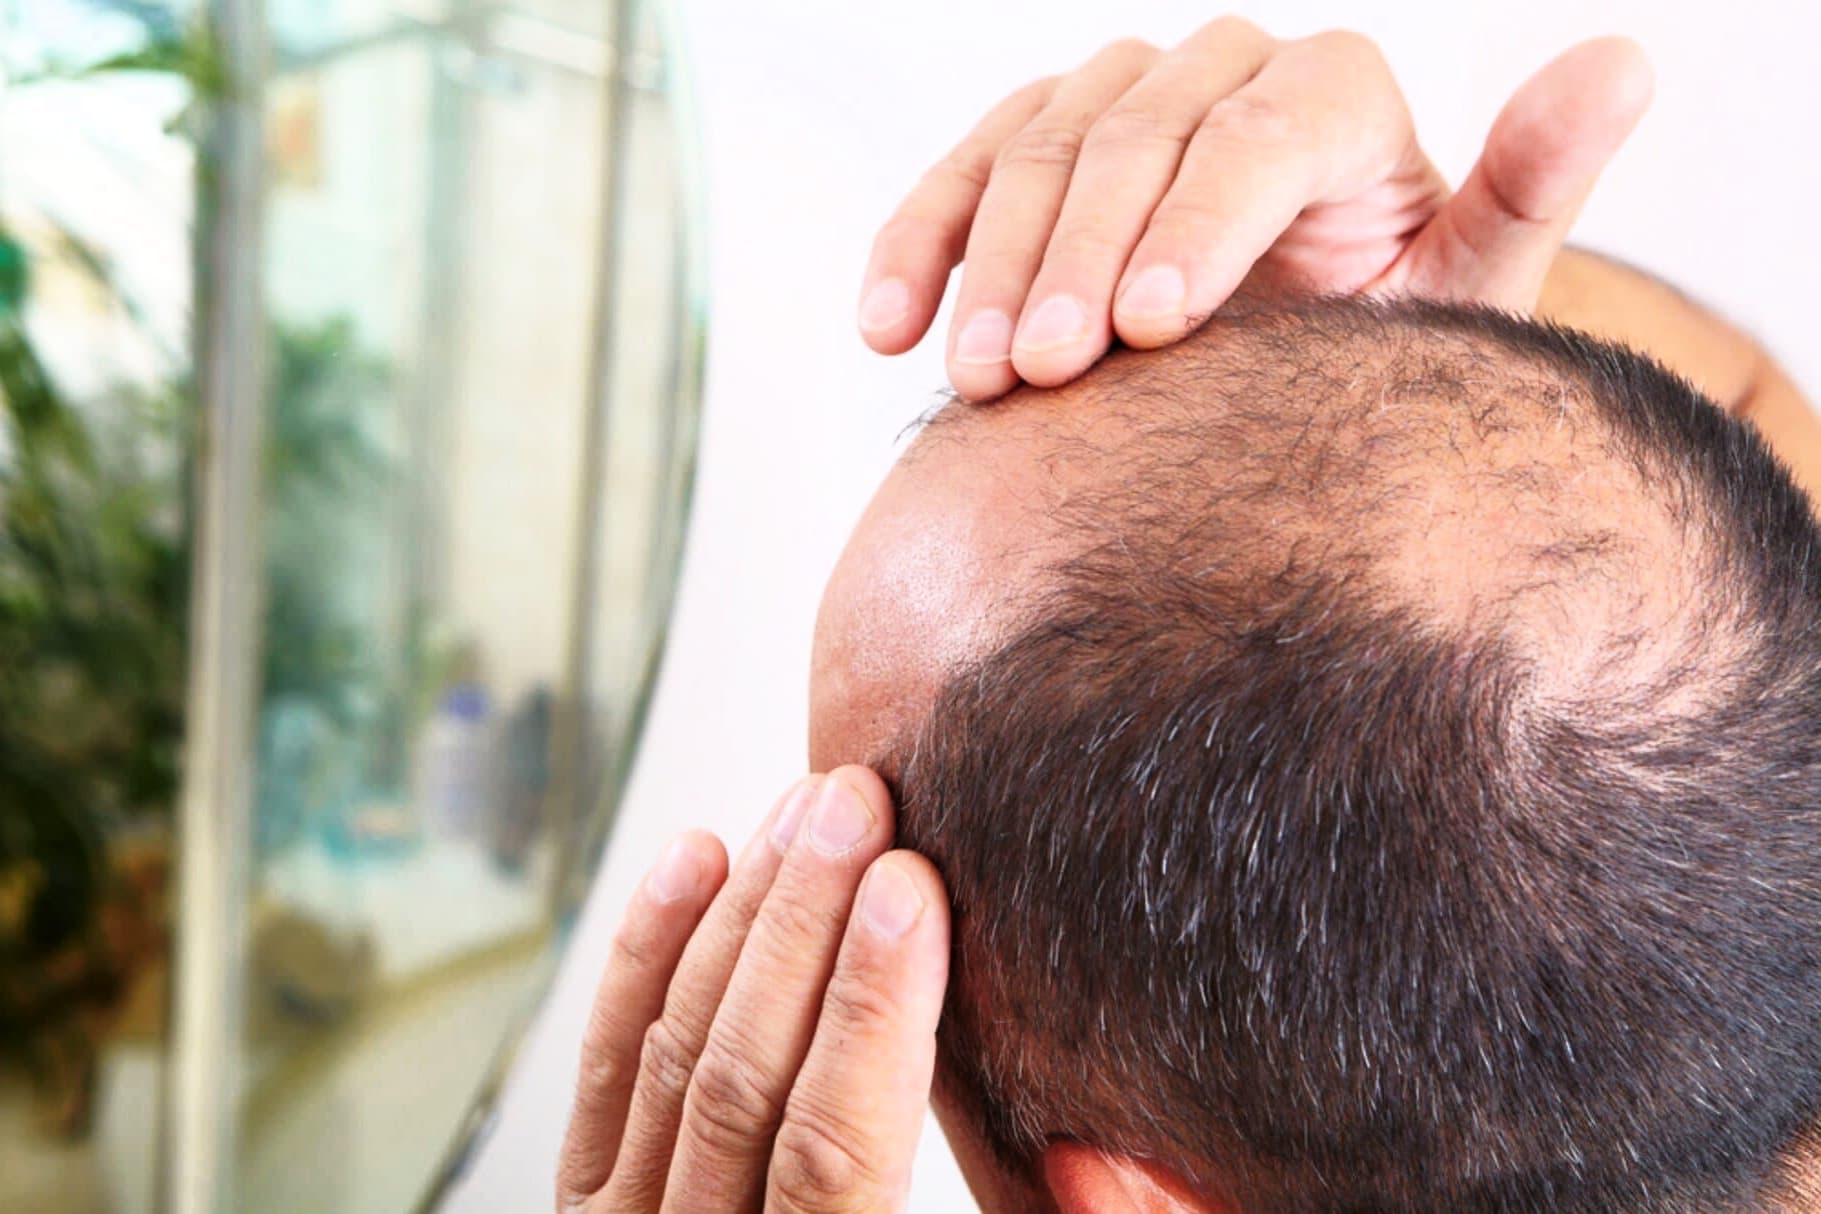 Male Pattern Baldness, Causes, Stages & Treatments